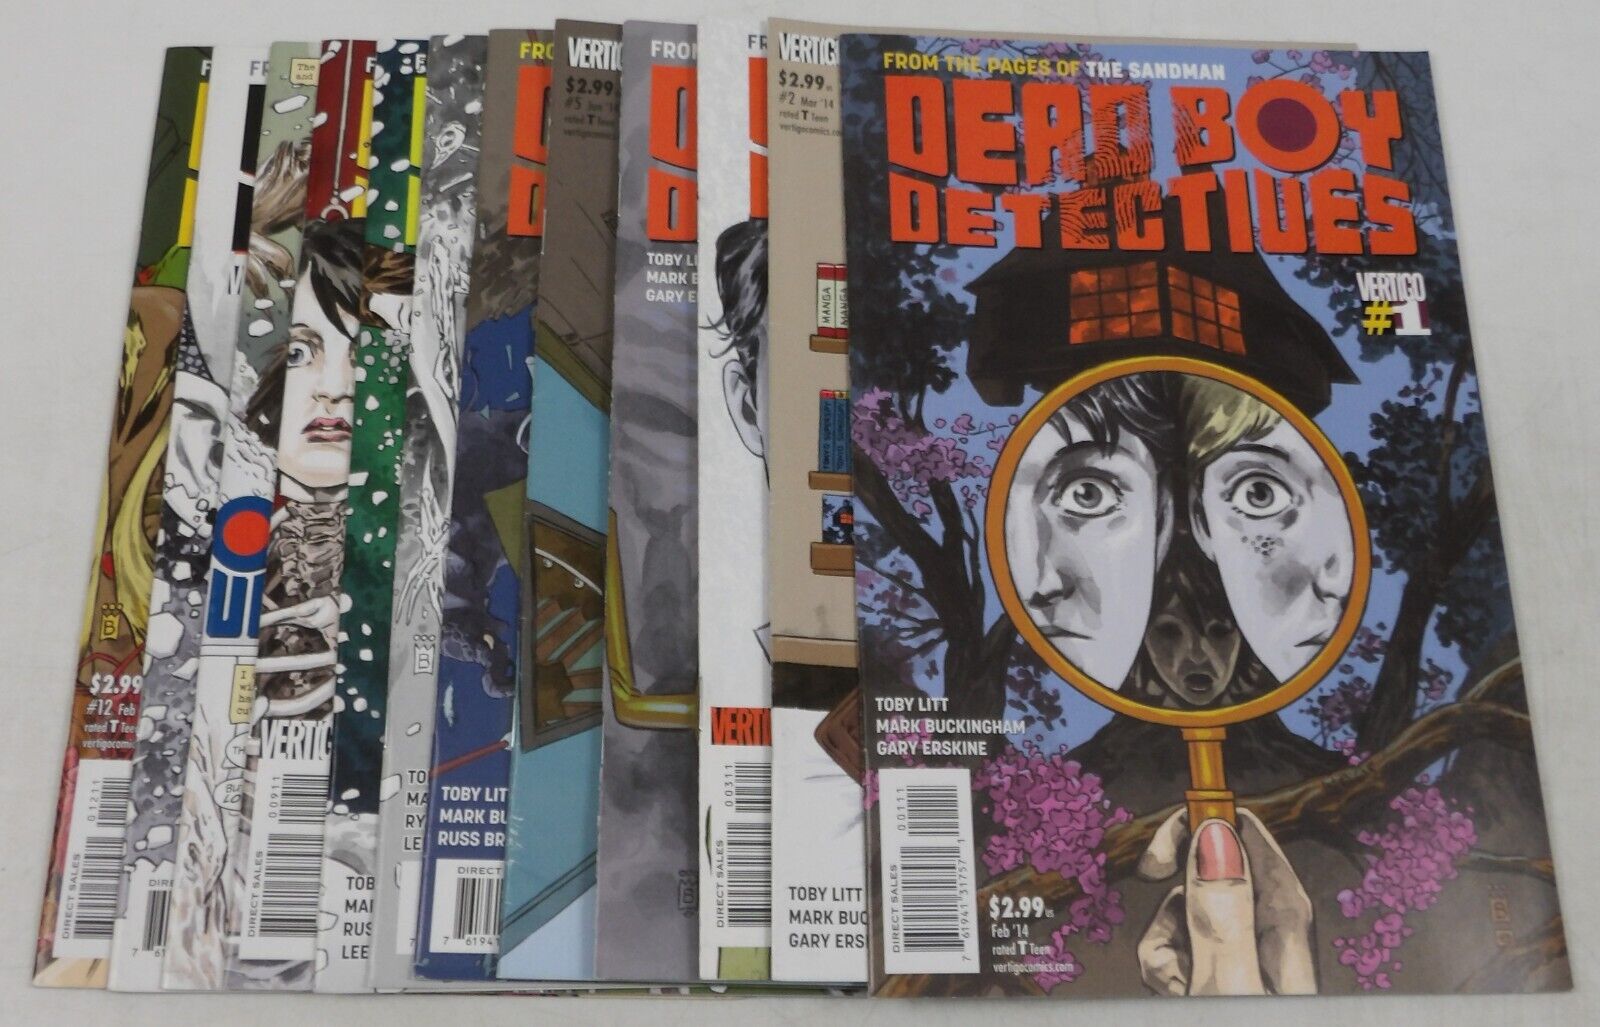 Dead Boy Detectives #1-12 VF/NM complete series from pages of the Sandman DC